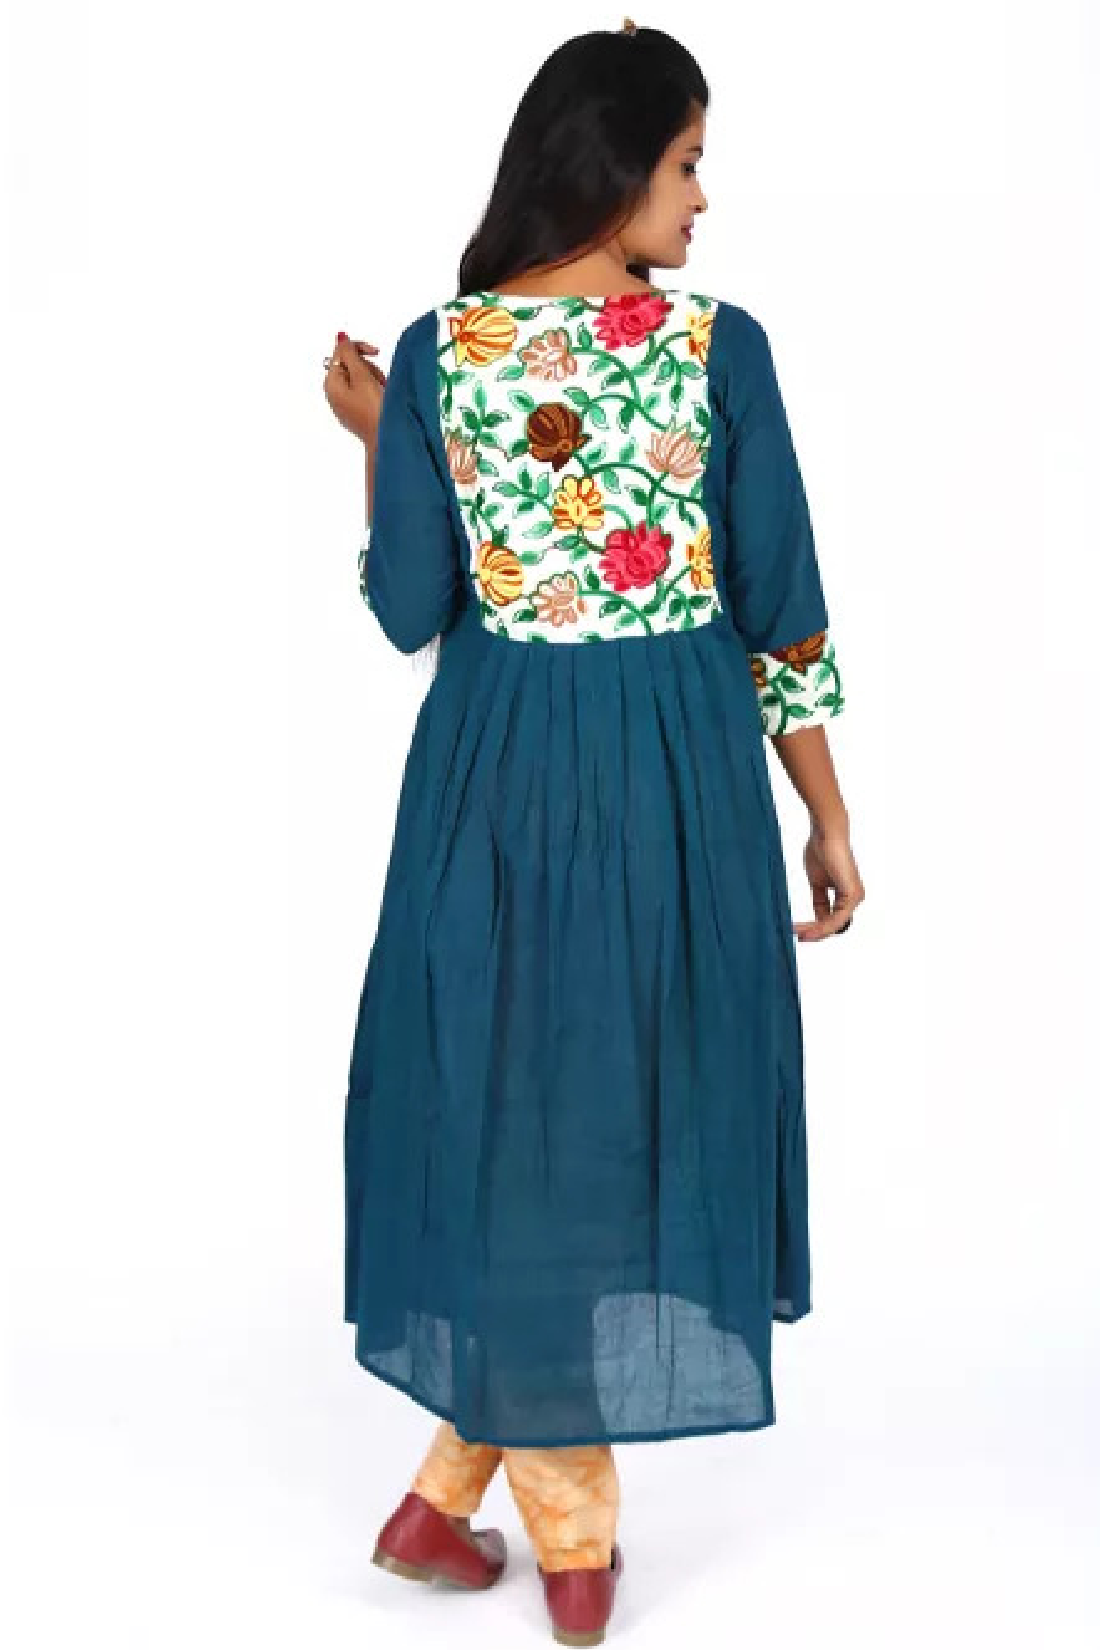 Handloom Cotton Round neck Pleated Kurta with Embroidery Patches, Bottle Green , KW1035